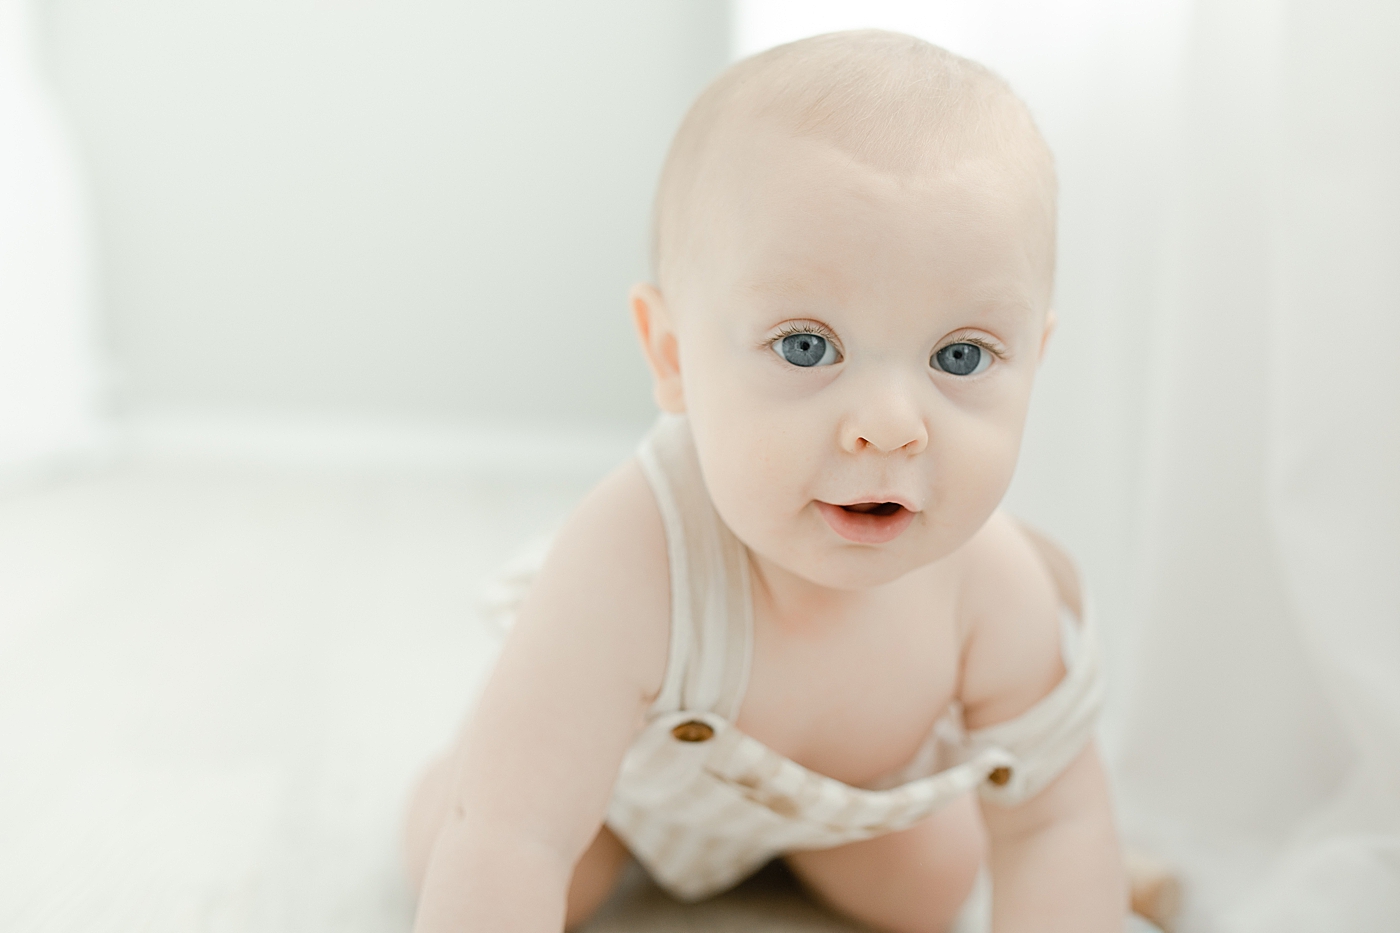 Baby boy with blue eyes in striped overalls | Photo by Little Sunshine Photography